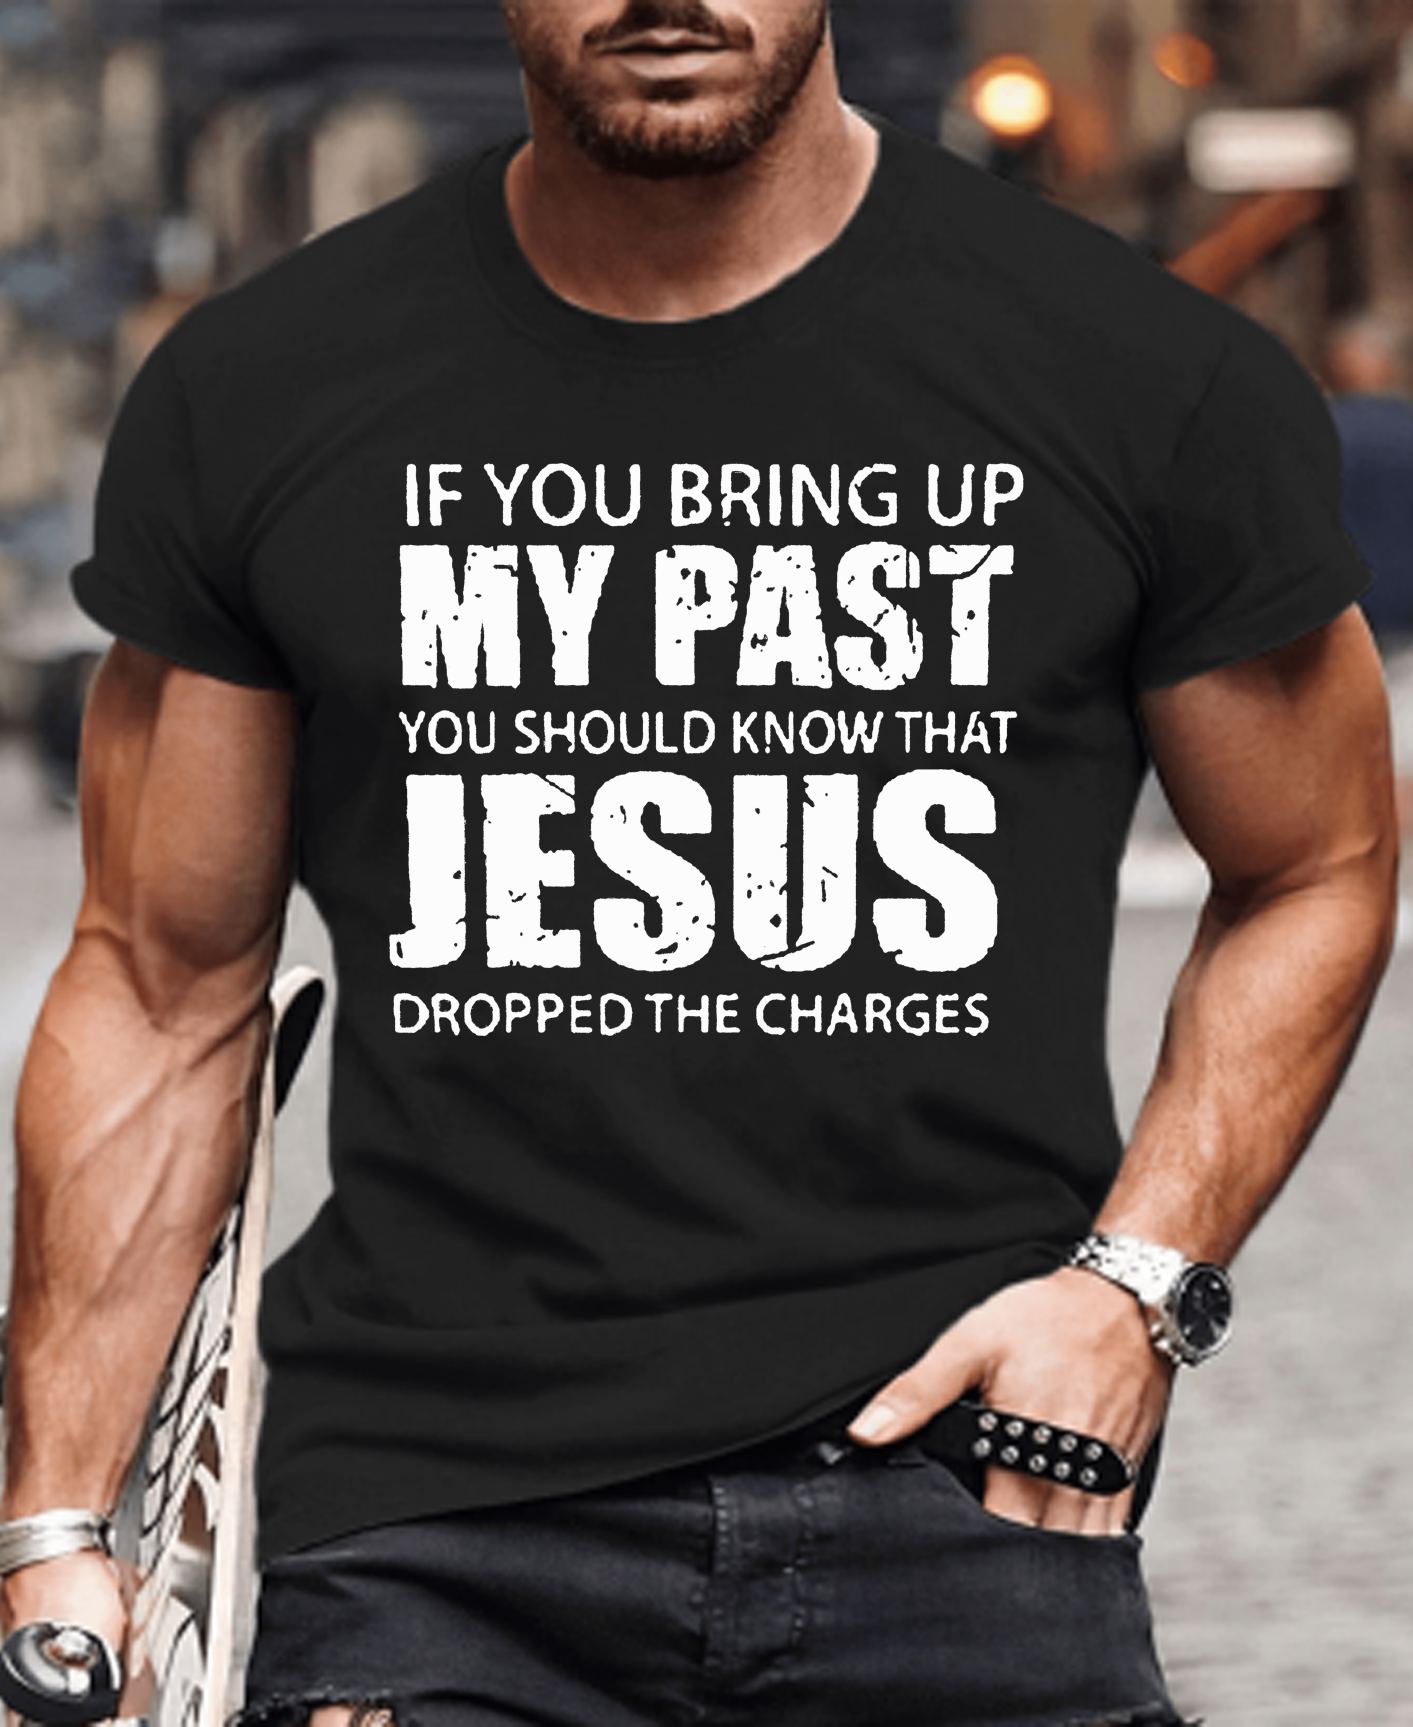 If You Bring up My Past You Should Know that Jesus Dropped the Charges Tee